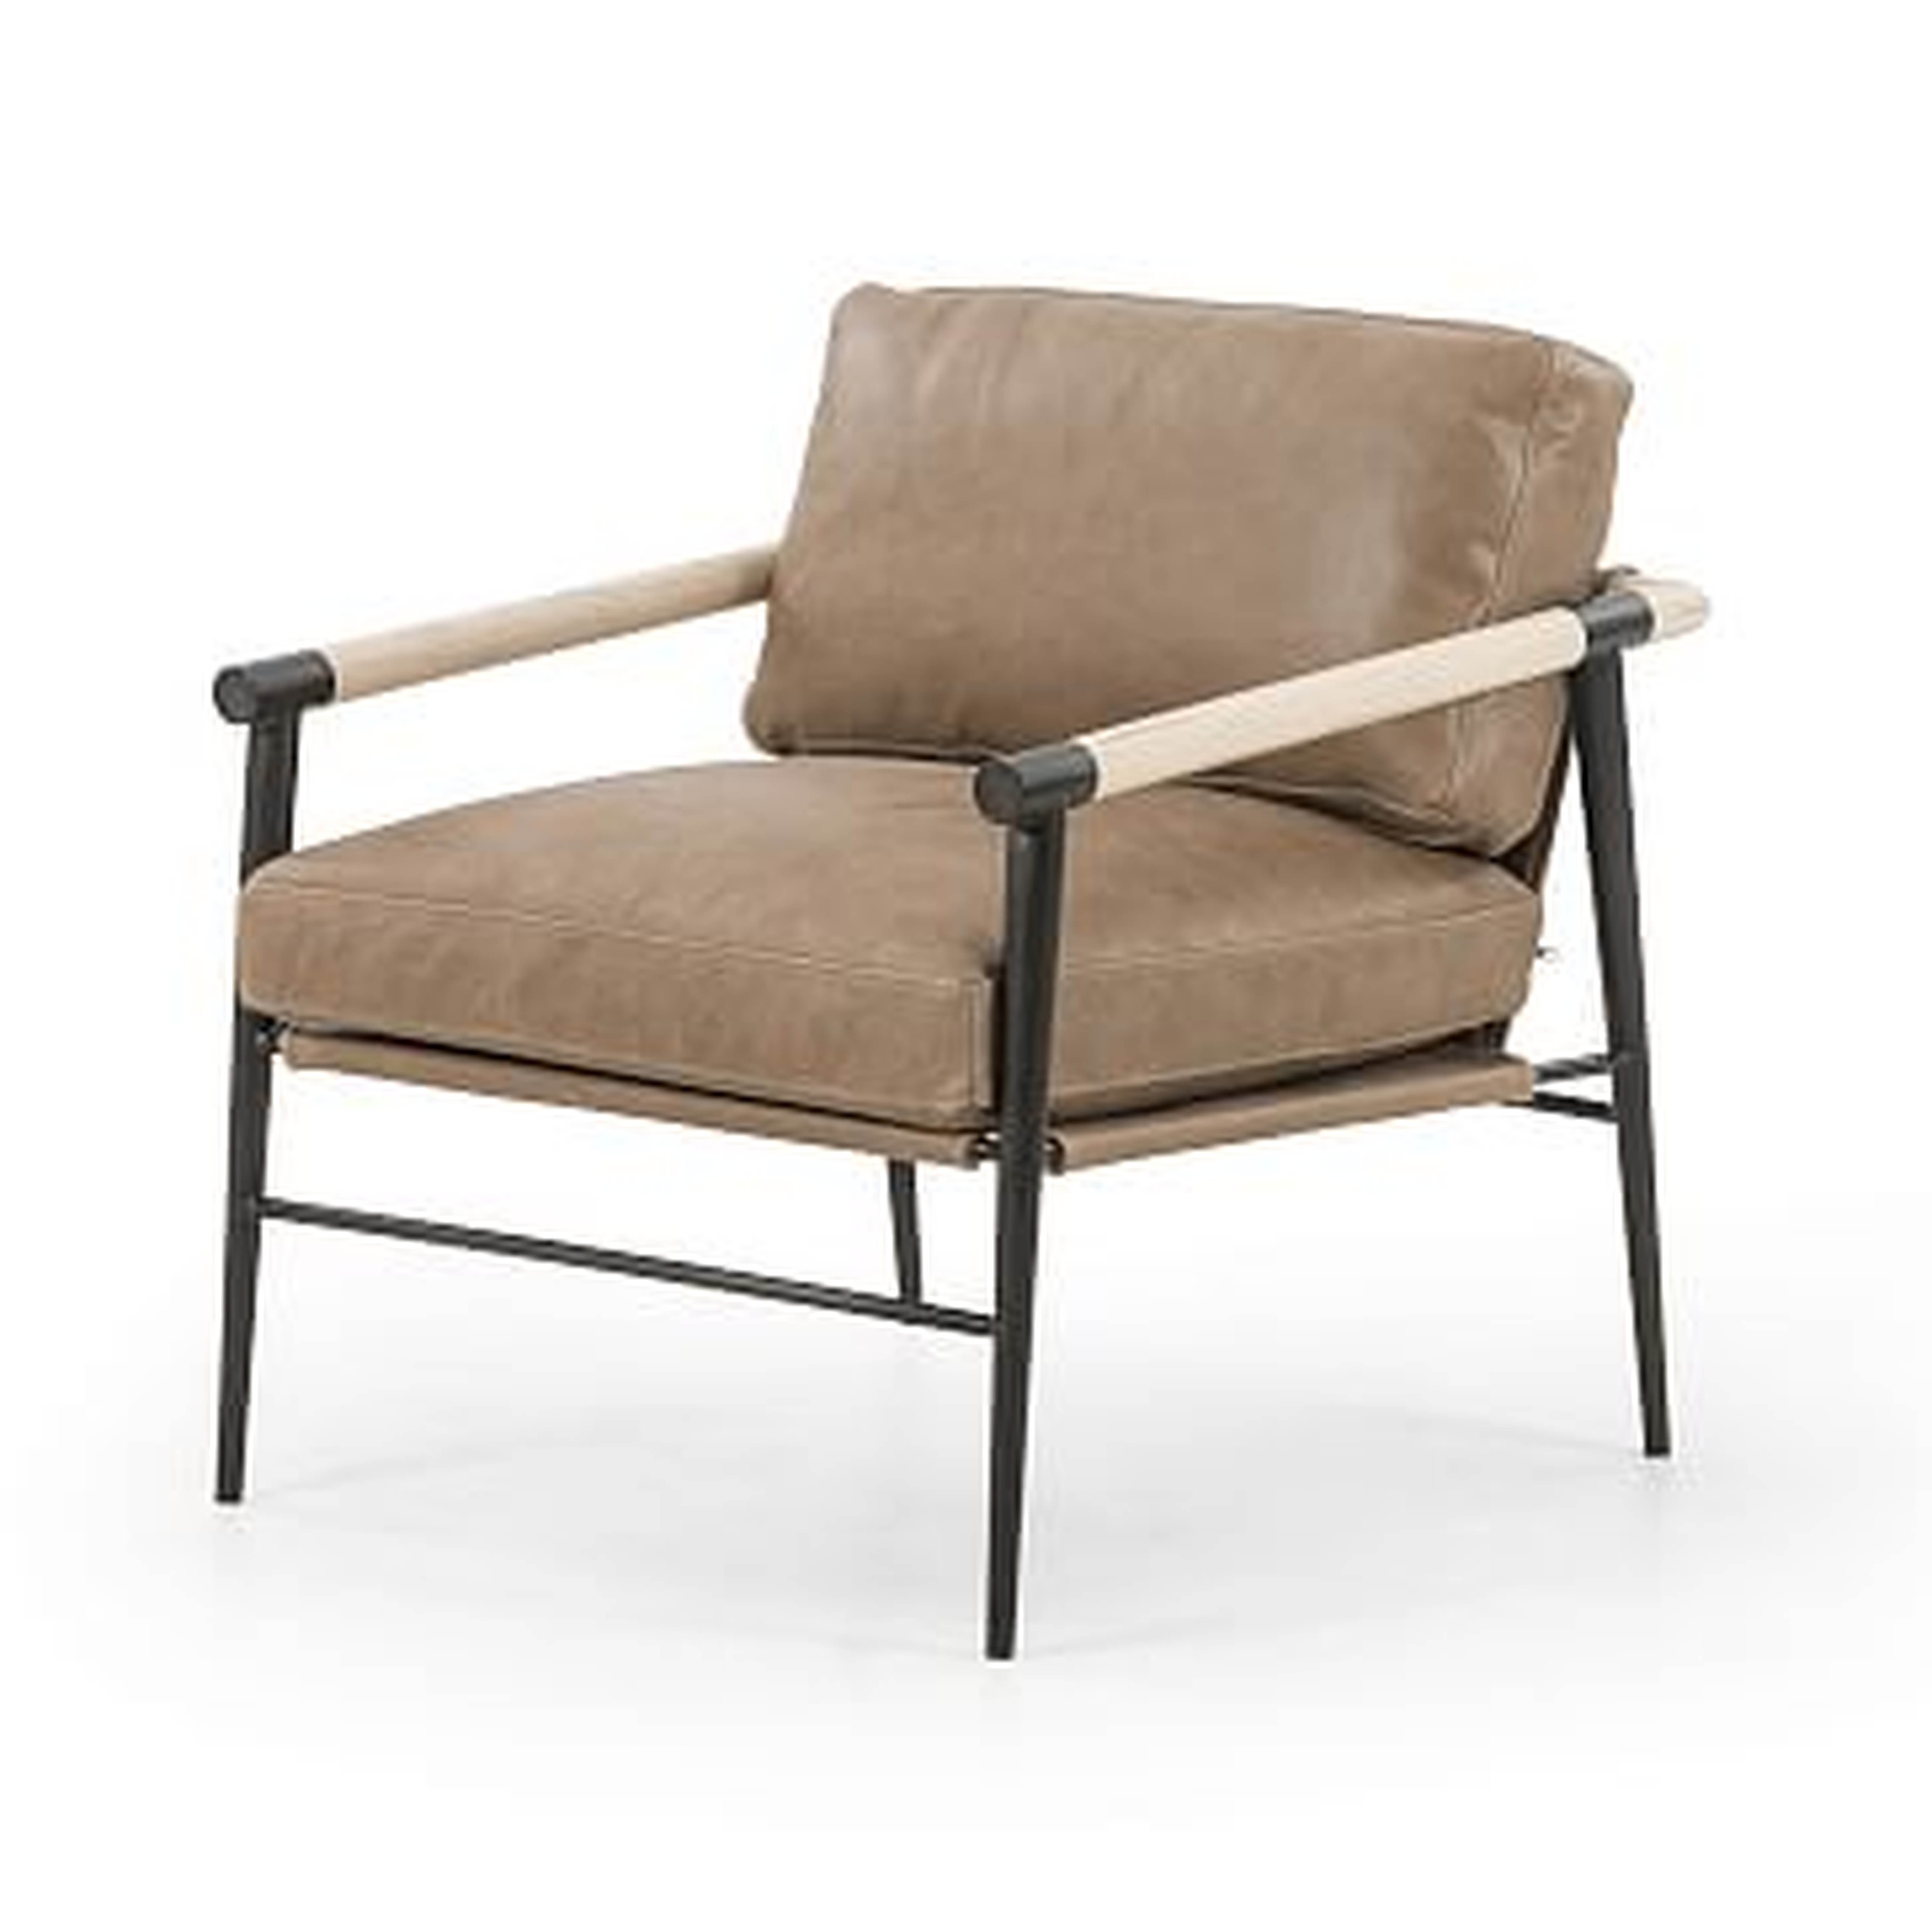 Carbon Framed Leather Chair, Palermo Drift - West Elm